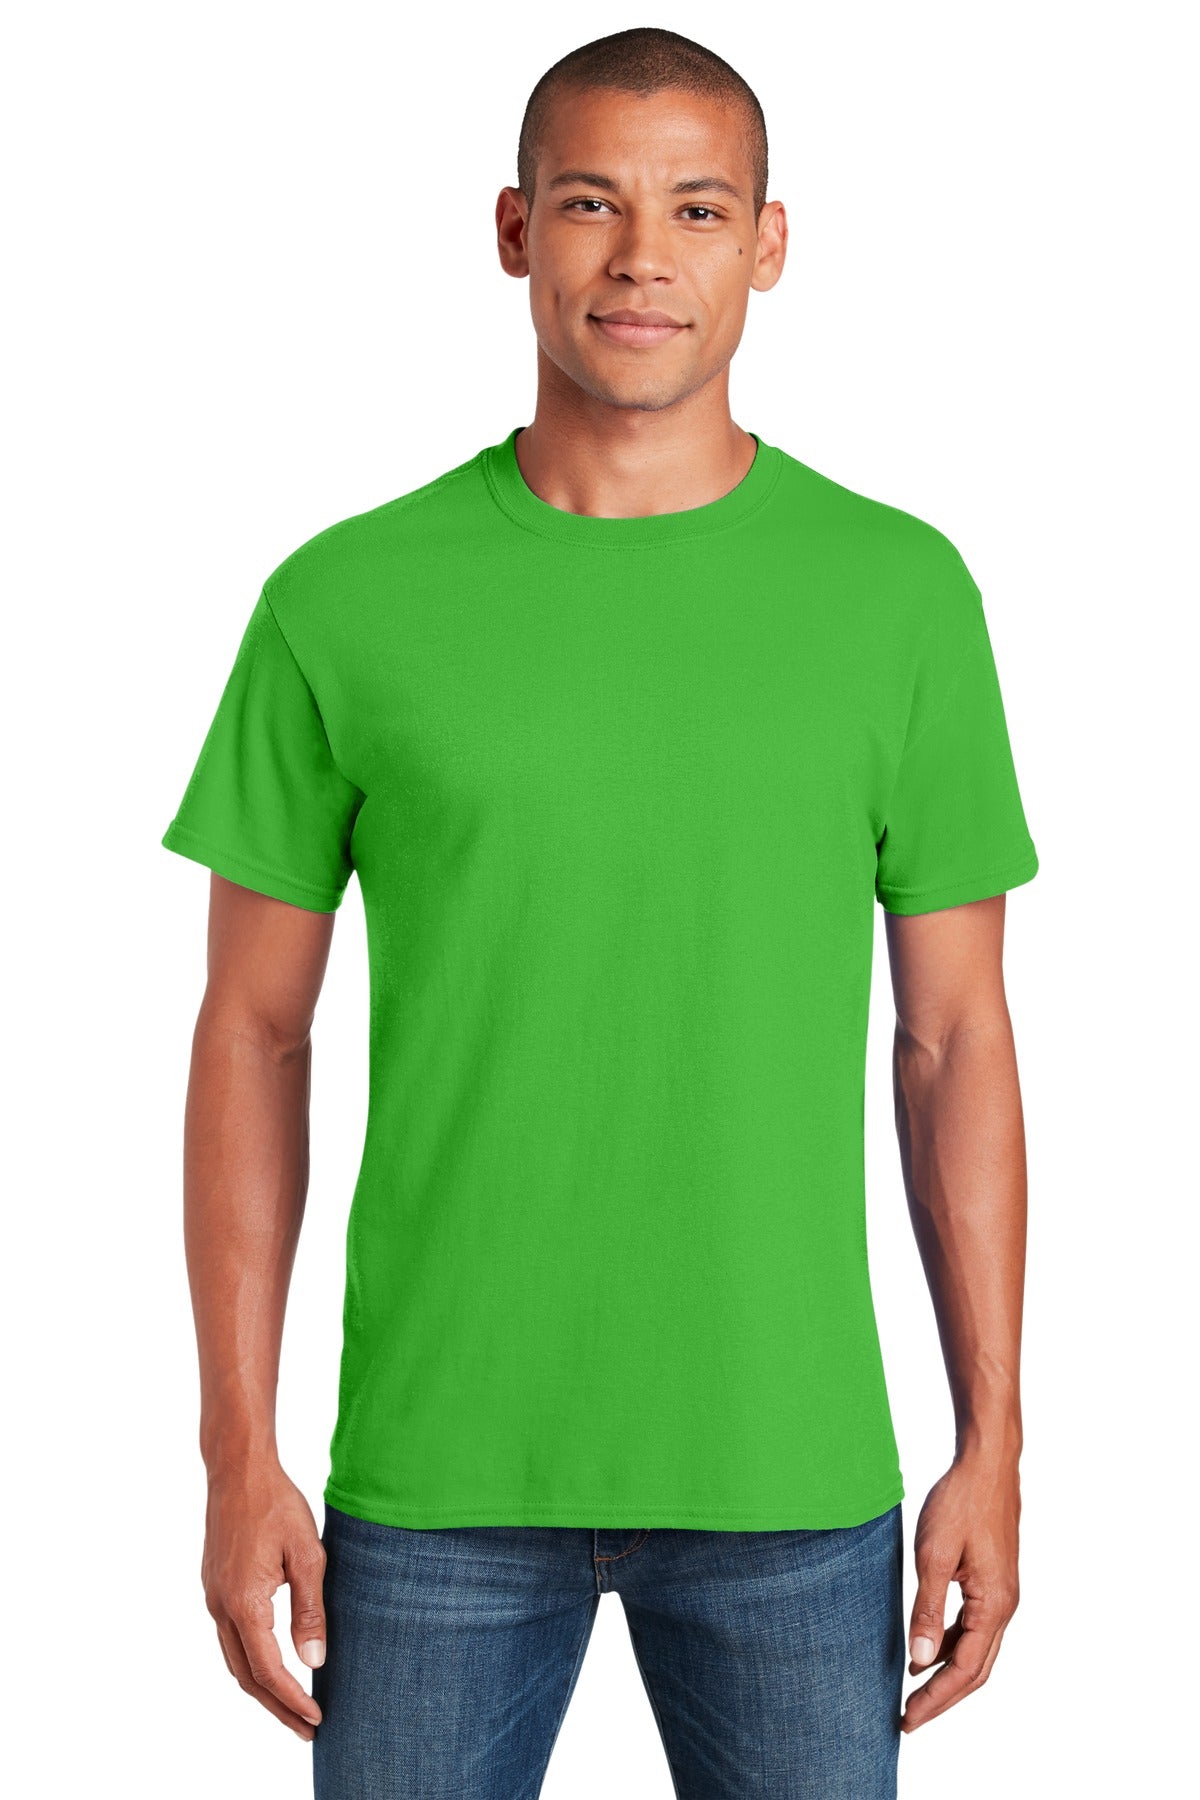 5000-ElectricGreen-S